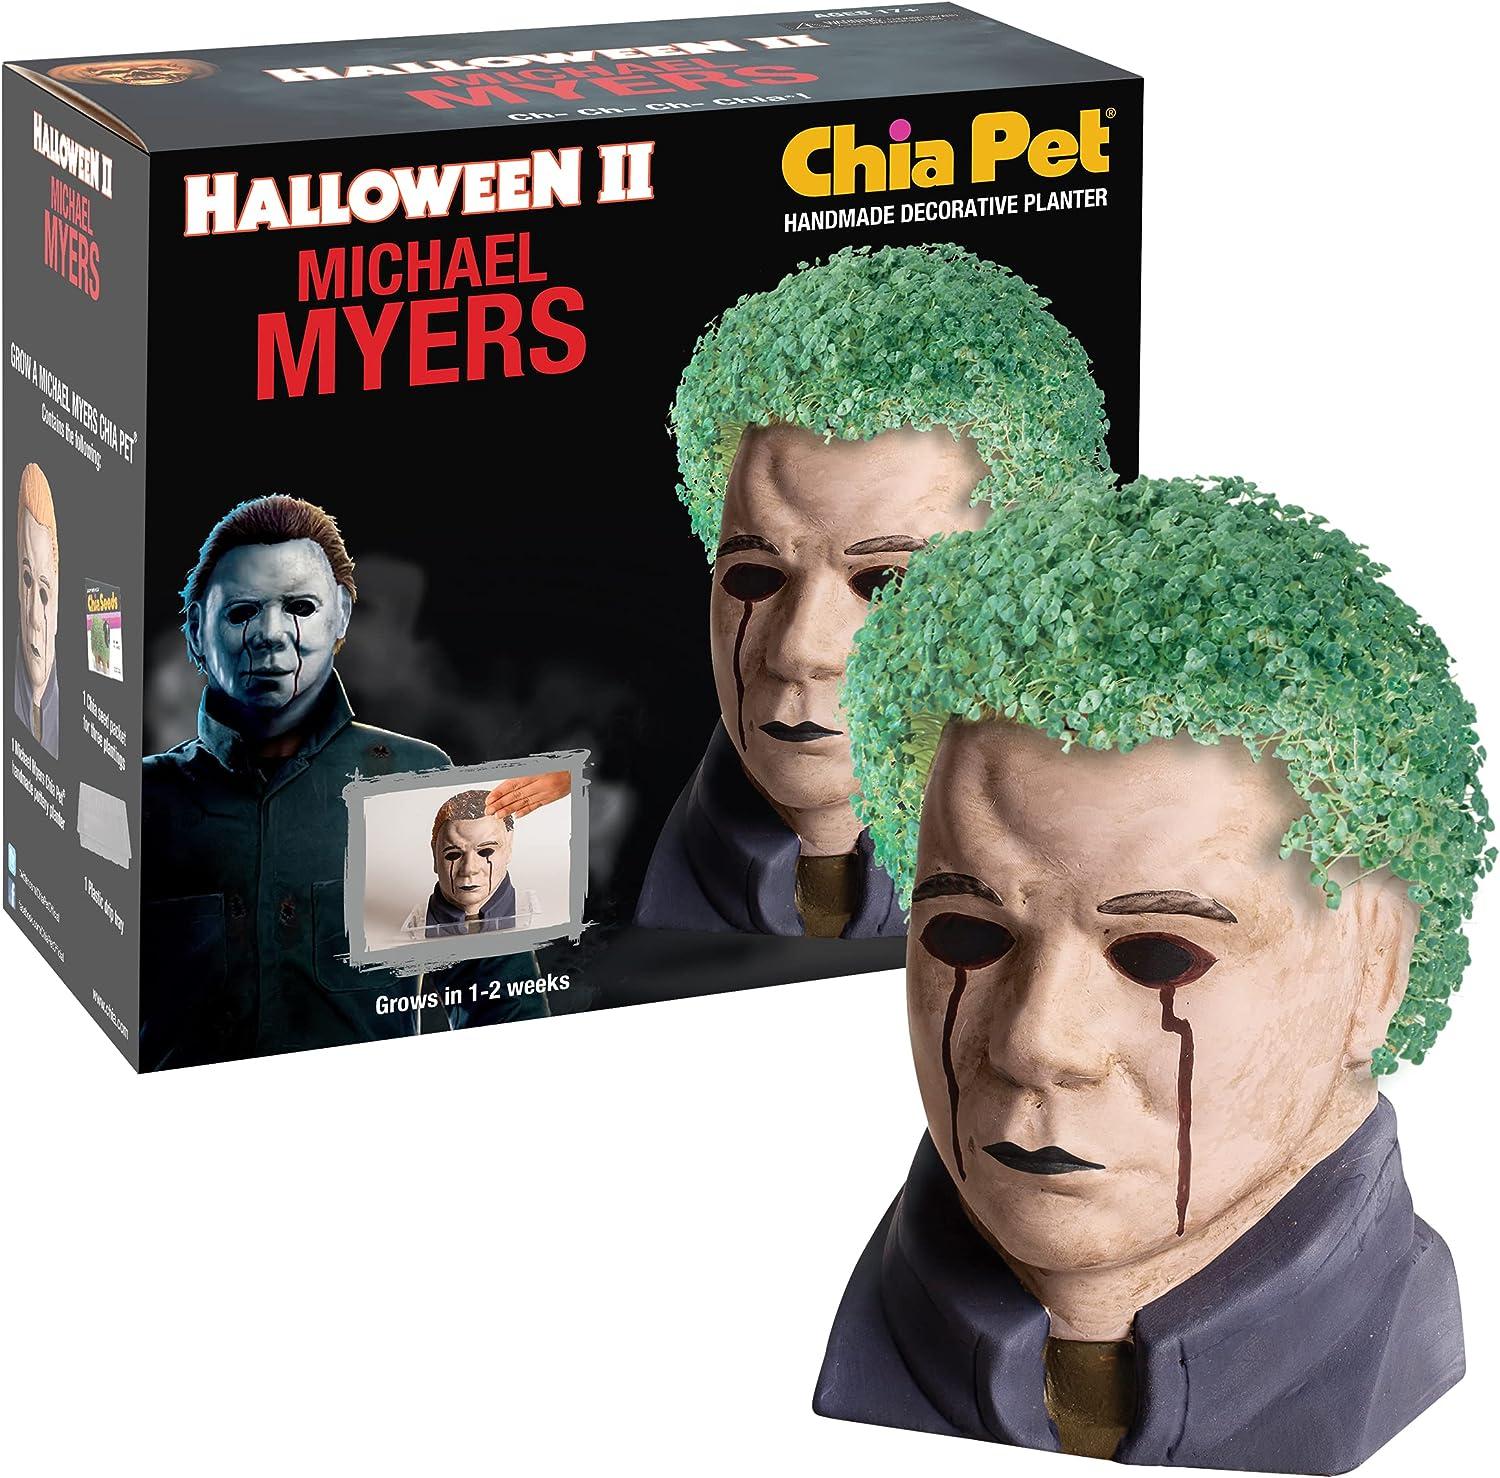 Chia Pet Michael Myers with Seed Pack Decorative Pottery Planter for $14.79